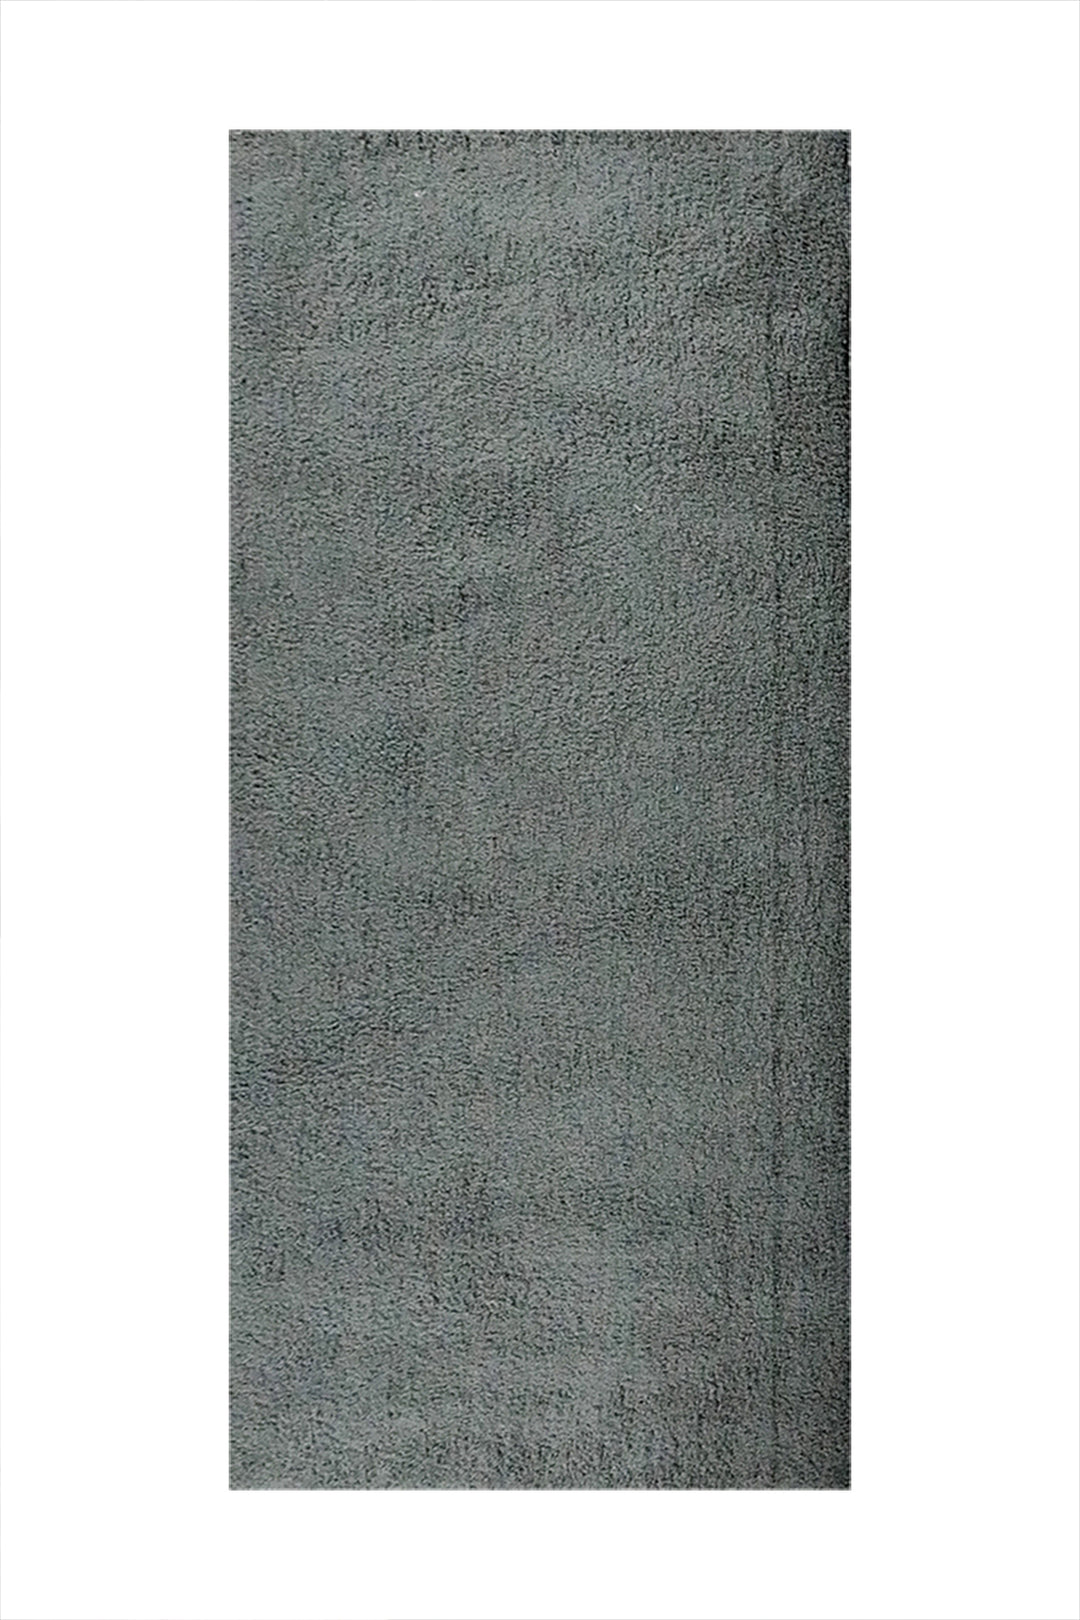 Turkish Modern Festival WD Rug - 3.2 x 6.5 FT - Gray - Sleek and Minimalist for Chic Interiors